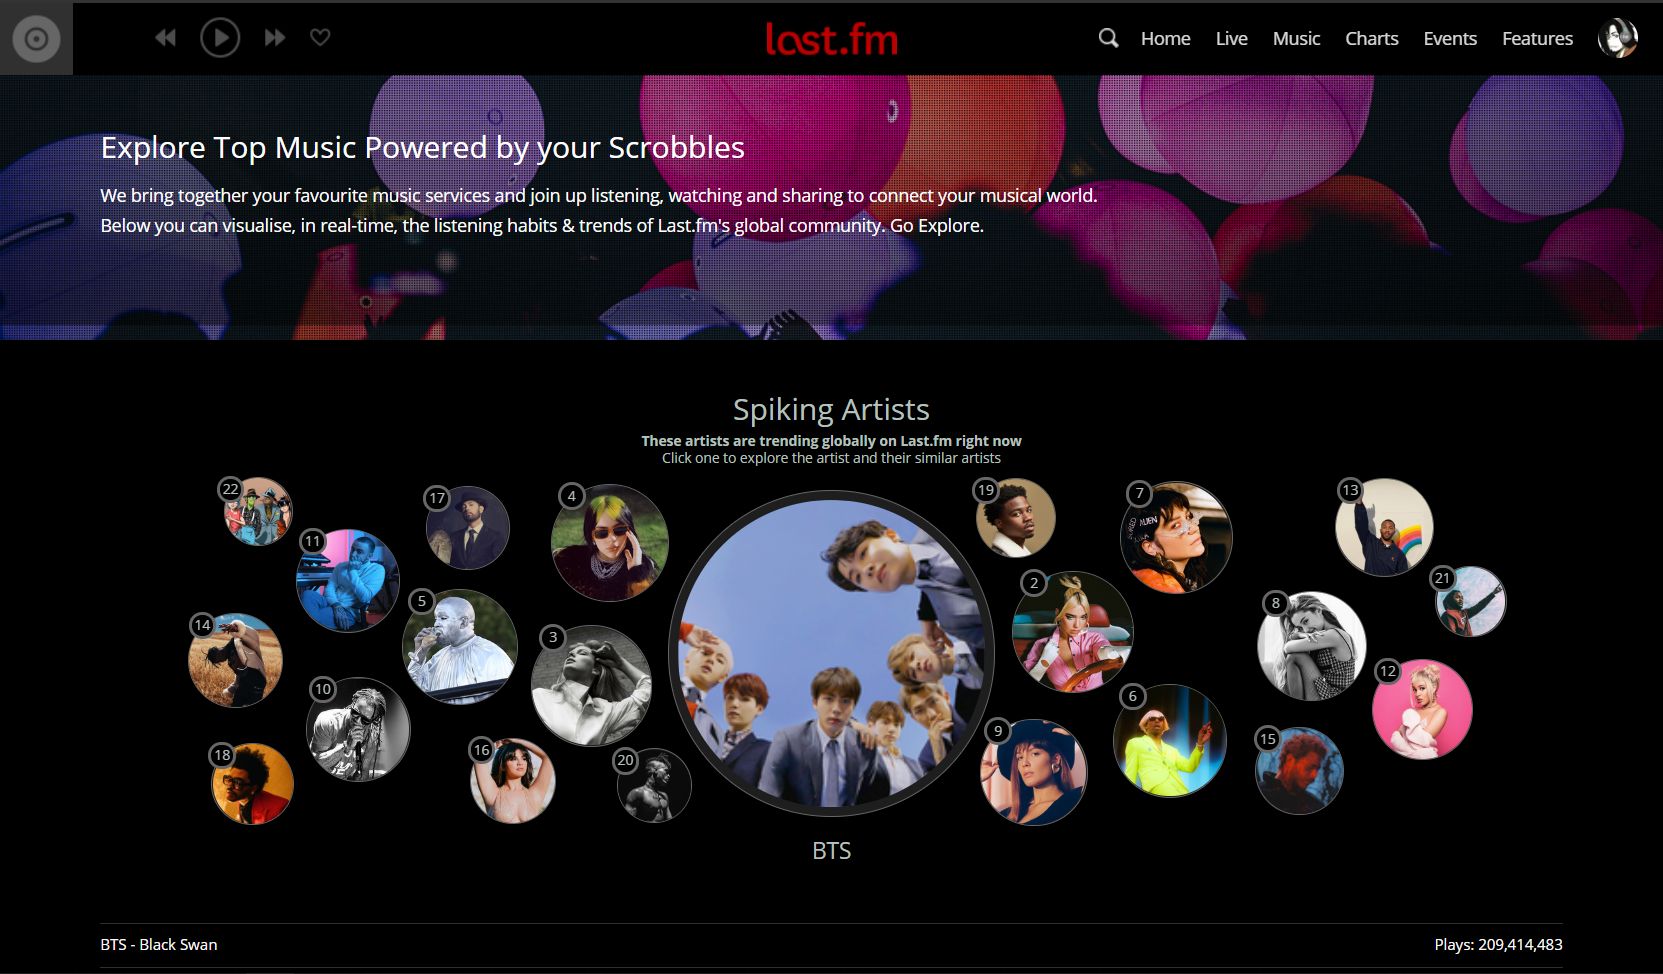 10 Best Last.fm Alternatives: Top Music Discovery Services in 2022